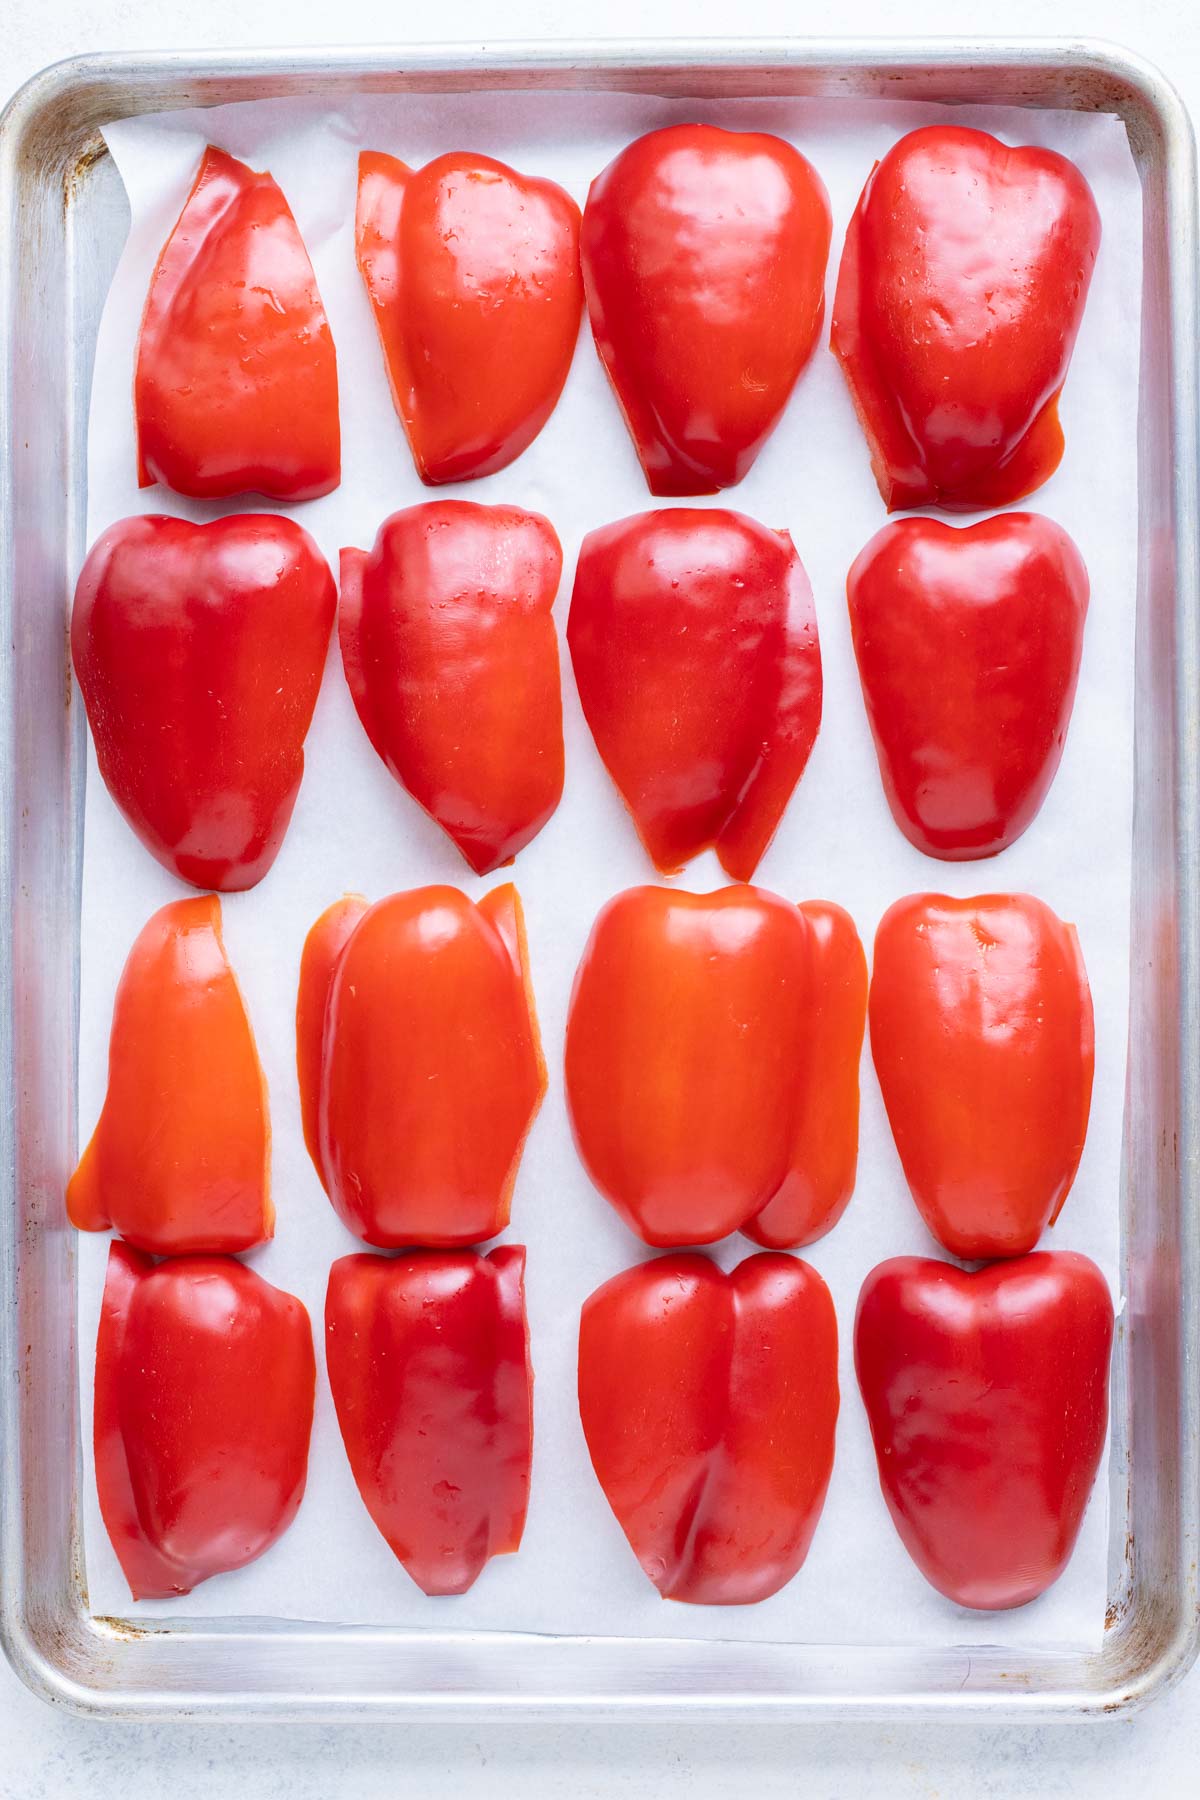 A sheet pan with even rows of sliced bell peppers.